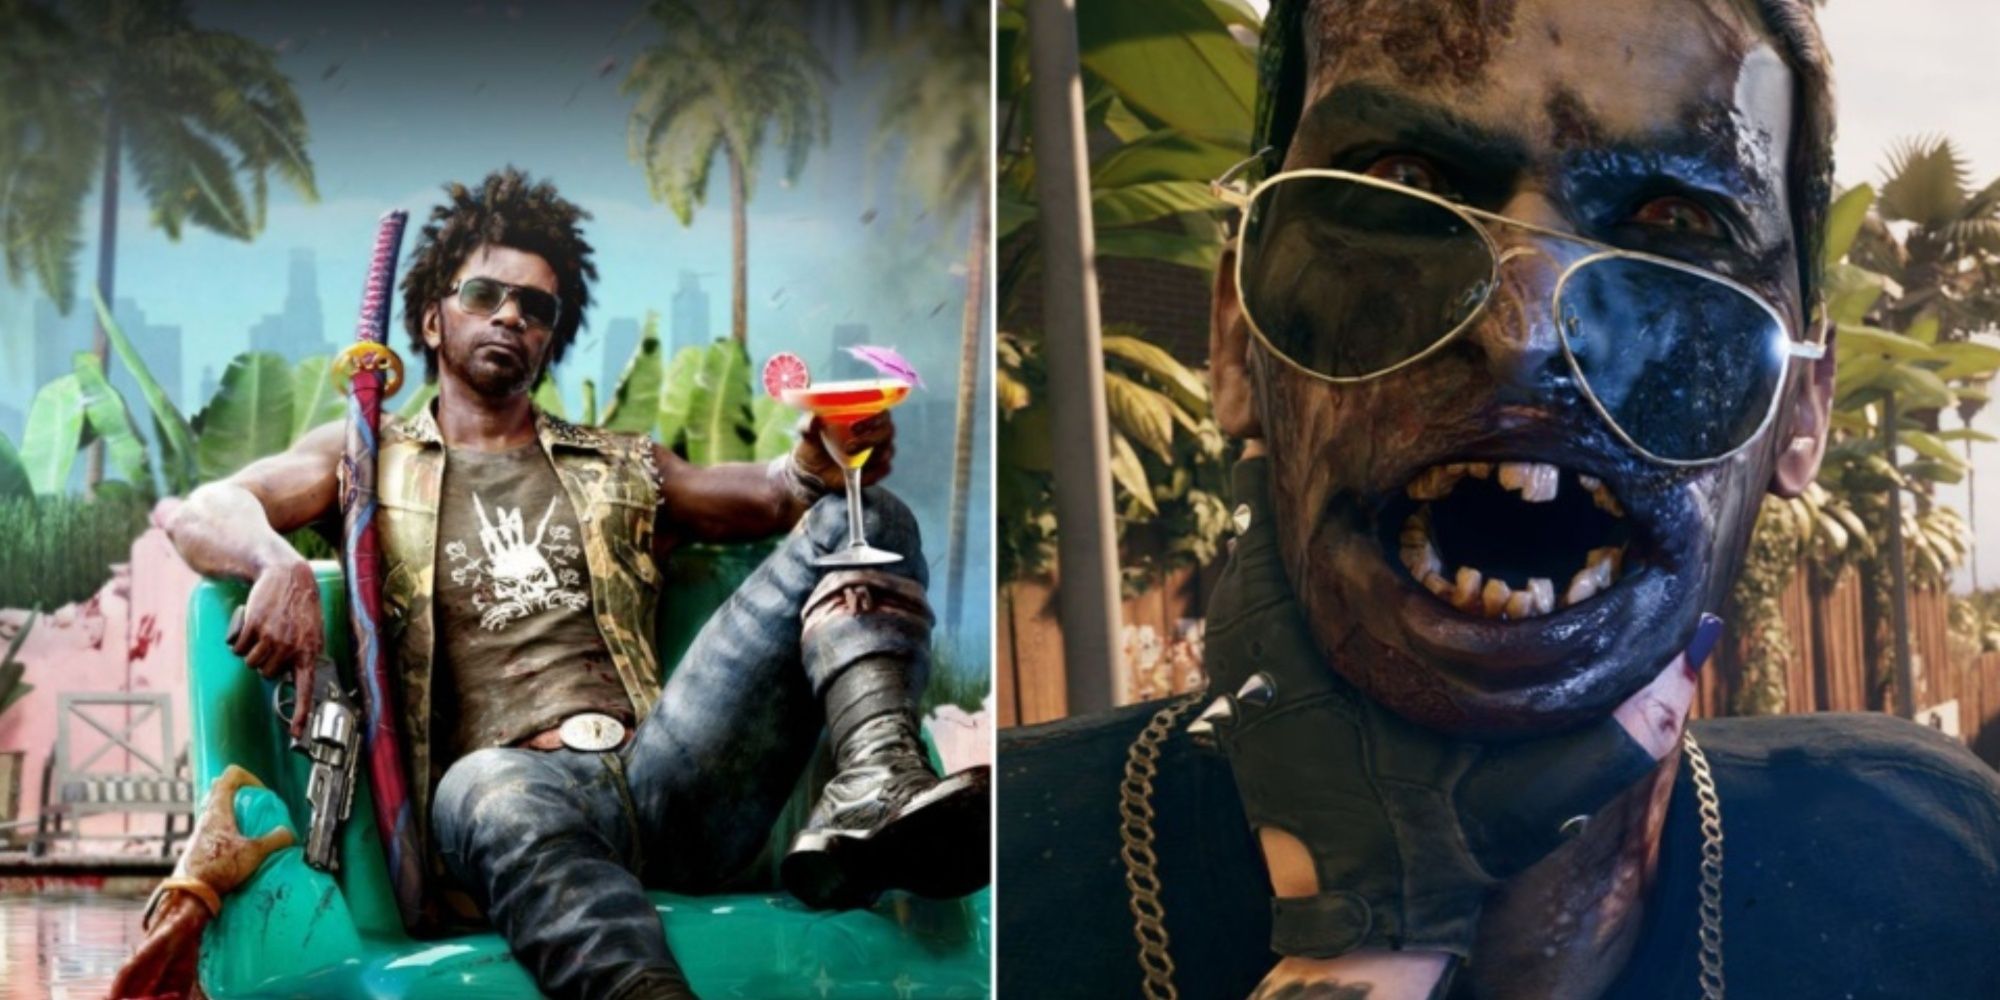 A collage showing Jacob on a pool while having a drink and the player grabbing a zombie by its neck.